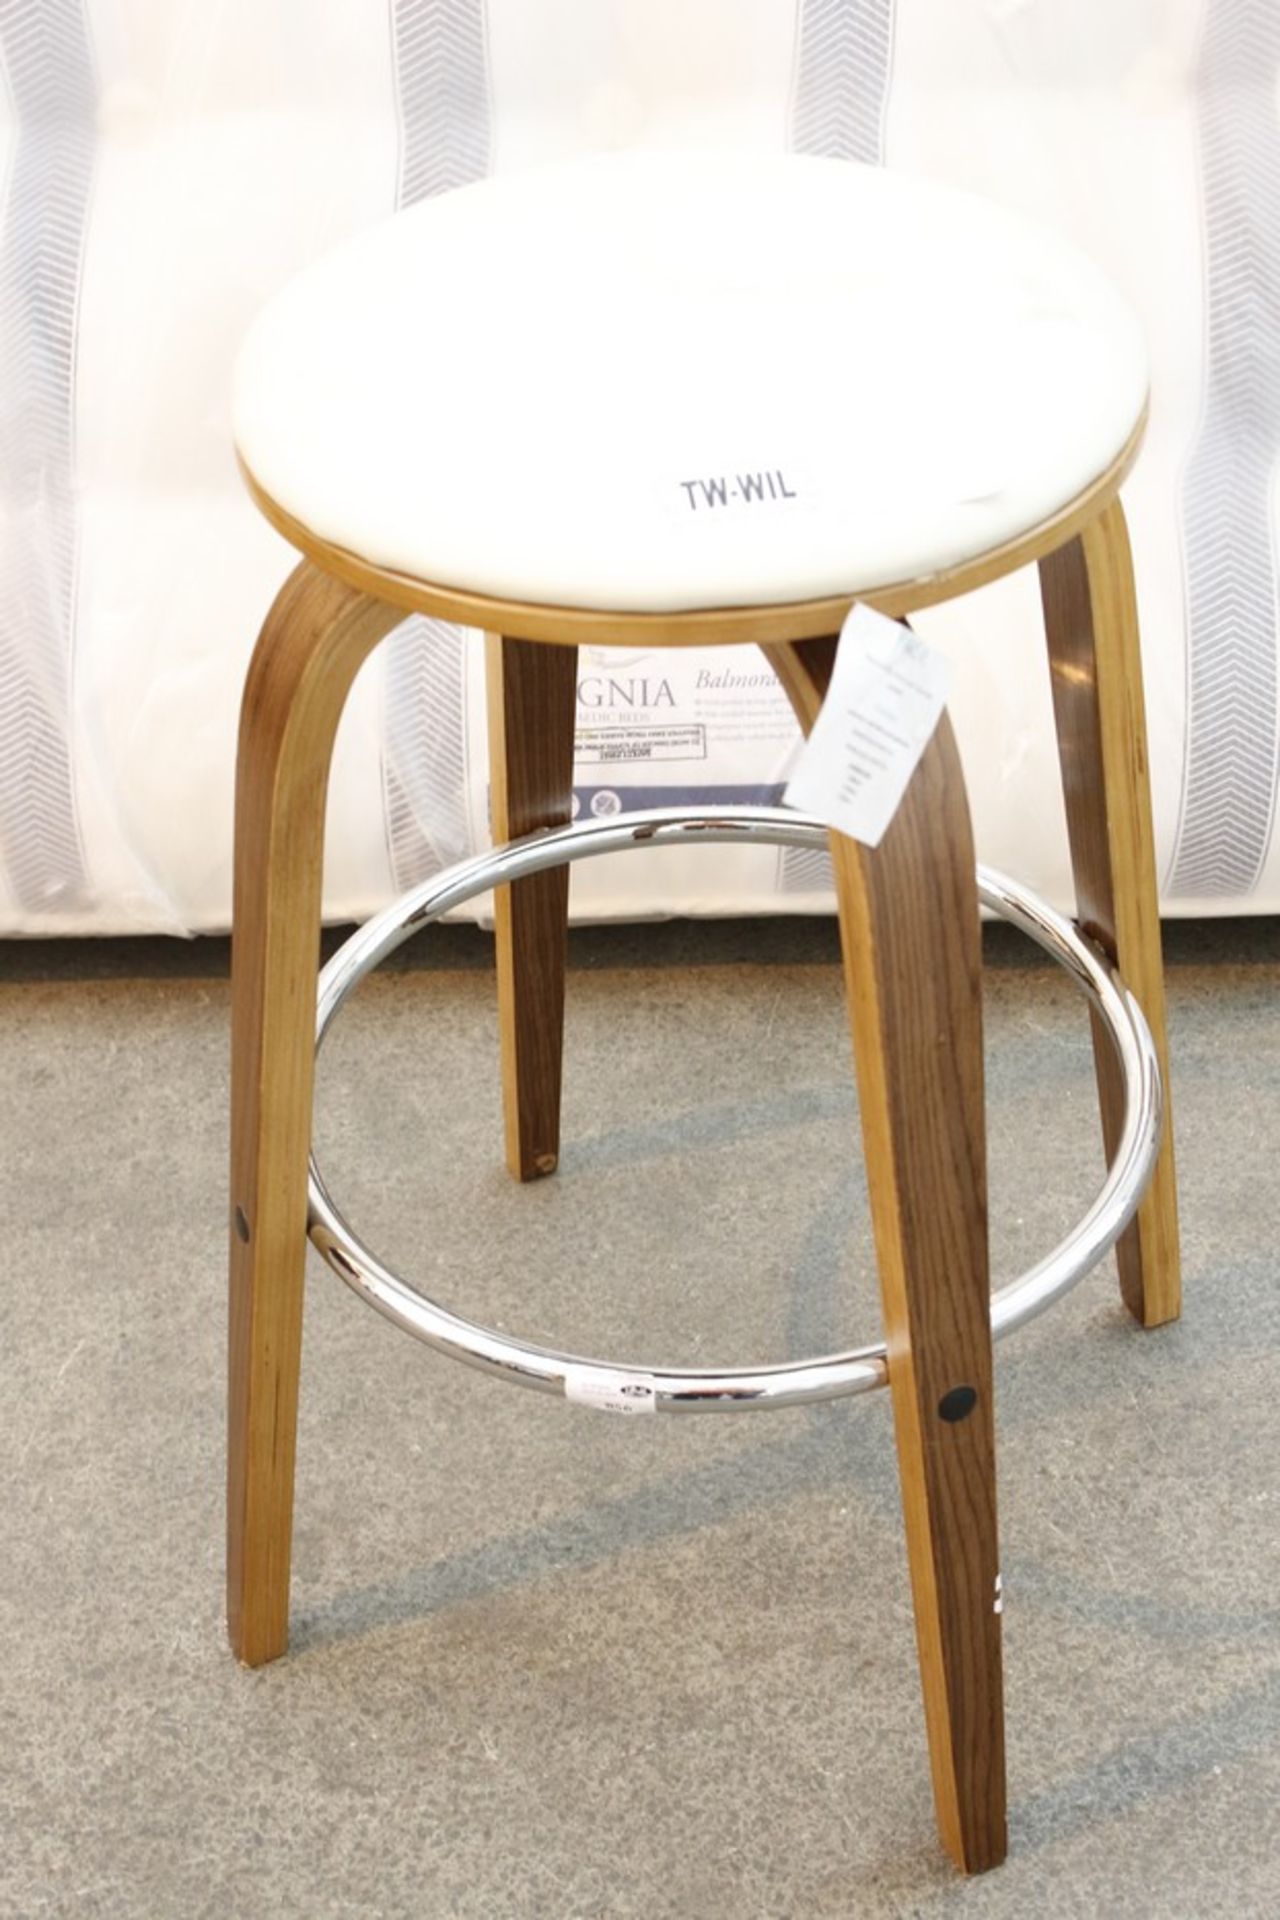 1 x POISE DESIGNER BAR STOOL RRP £100  *PLEASE NOTE THAT THE BID PRICE IS MULTIPLIED BY THE NUMBER